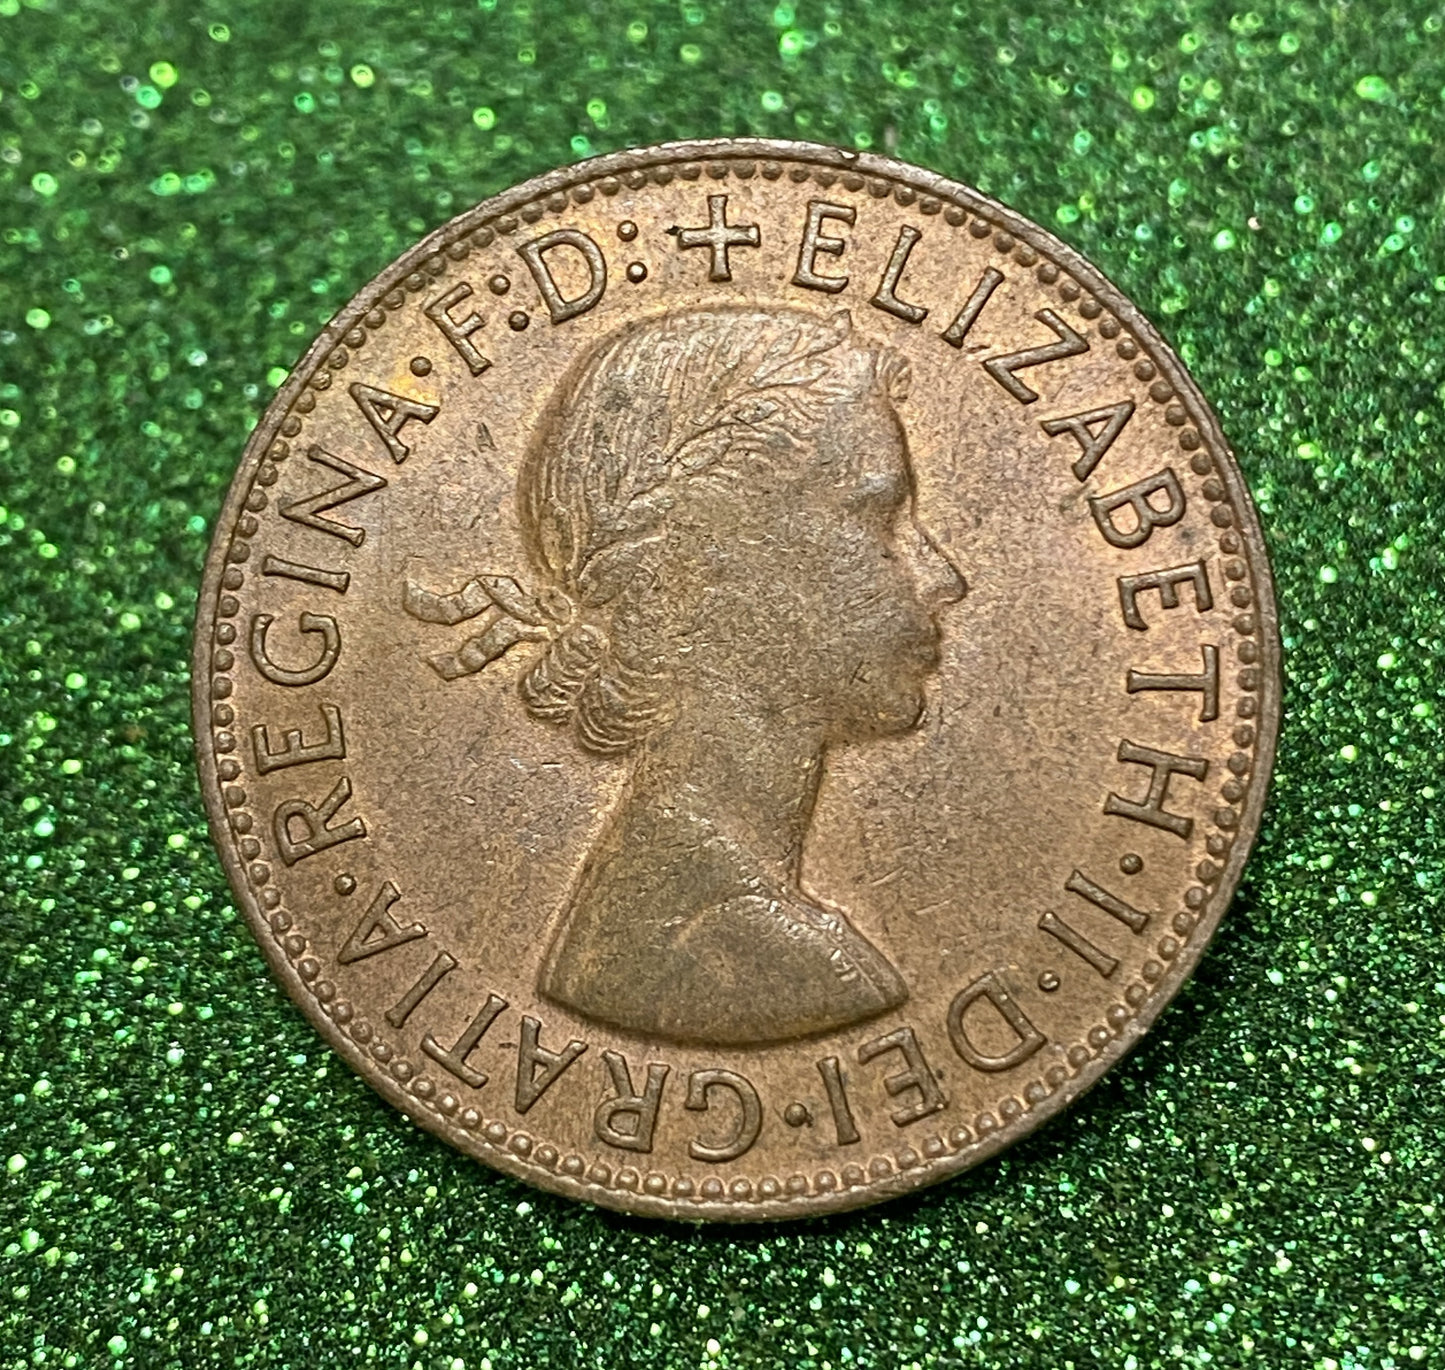 Australian 1 Cent LARGE PENNY COIN 1963 Queen Elizabeth VG/F CONDITION